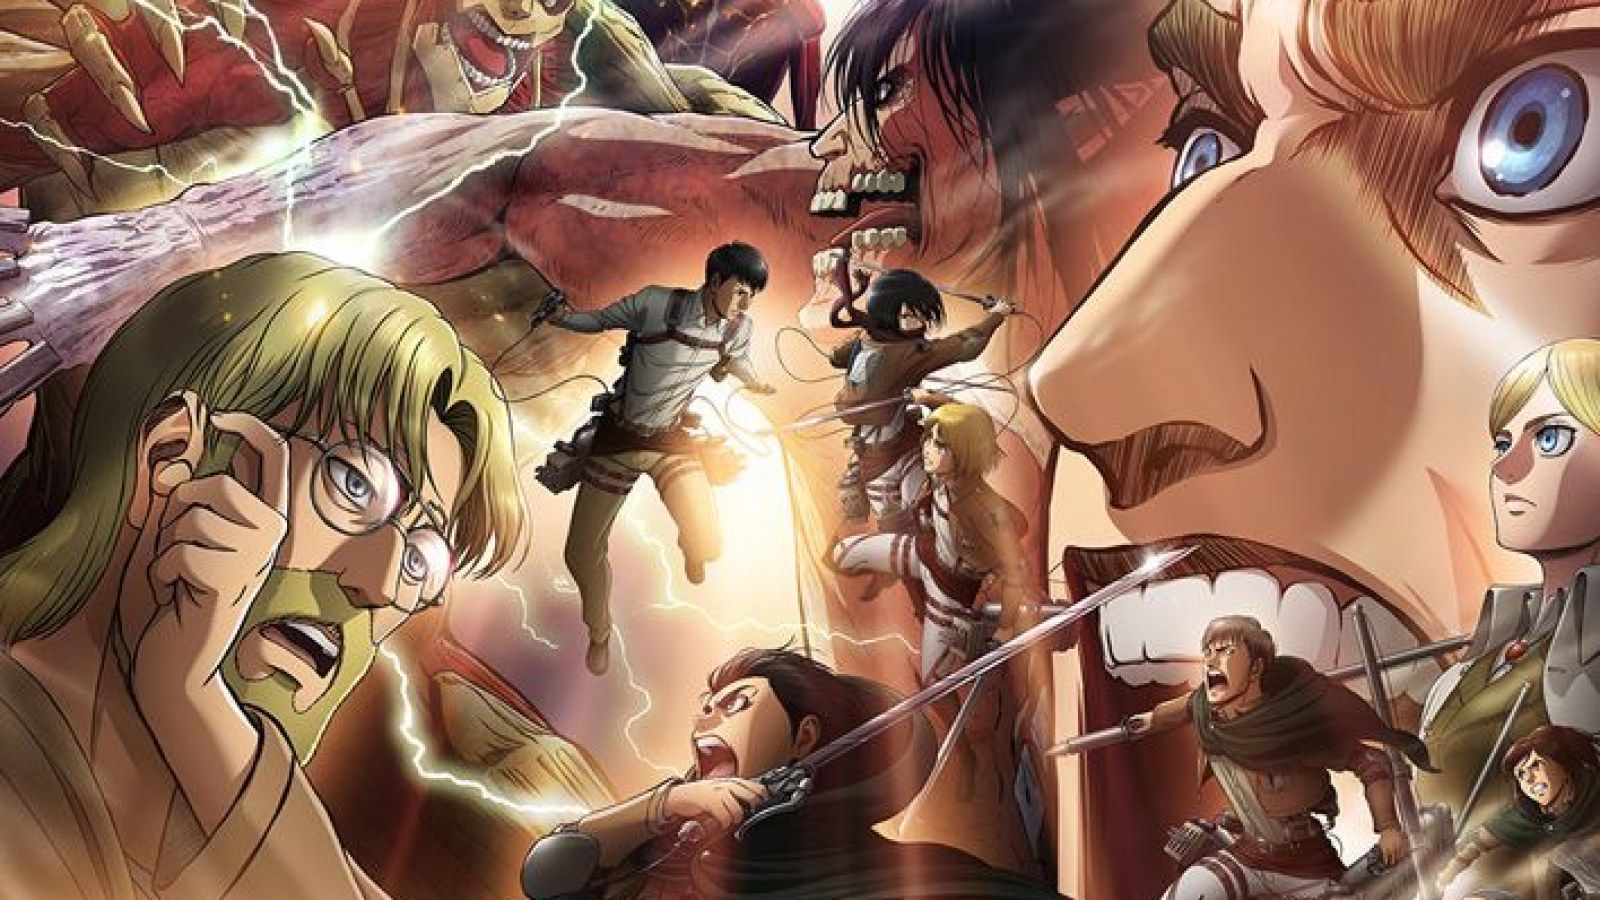 Attack on Titan' Season 3 Part 2: When and How to Watch Anime's Return Online